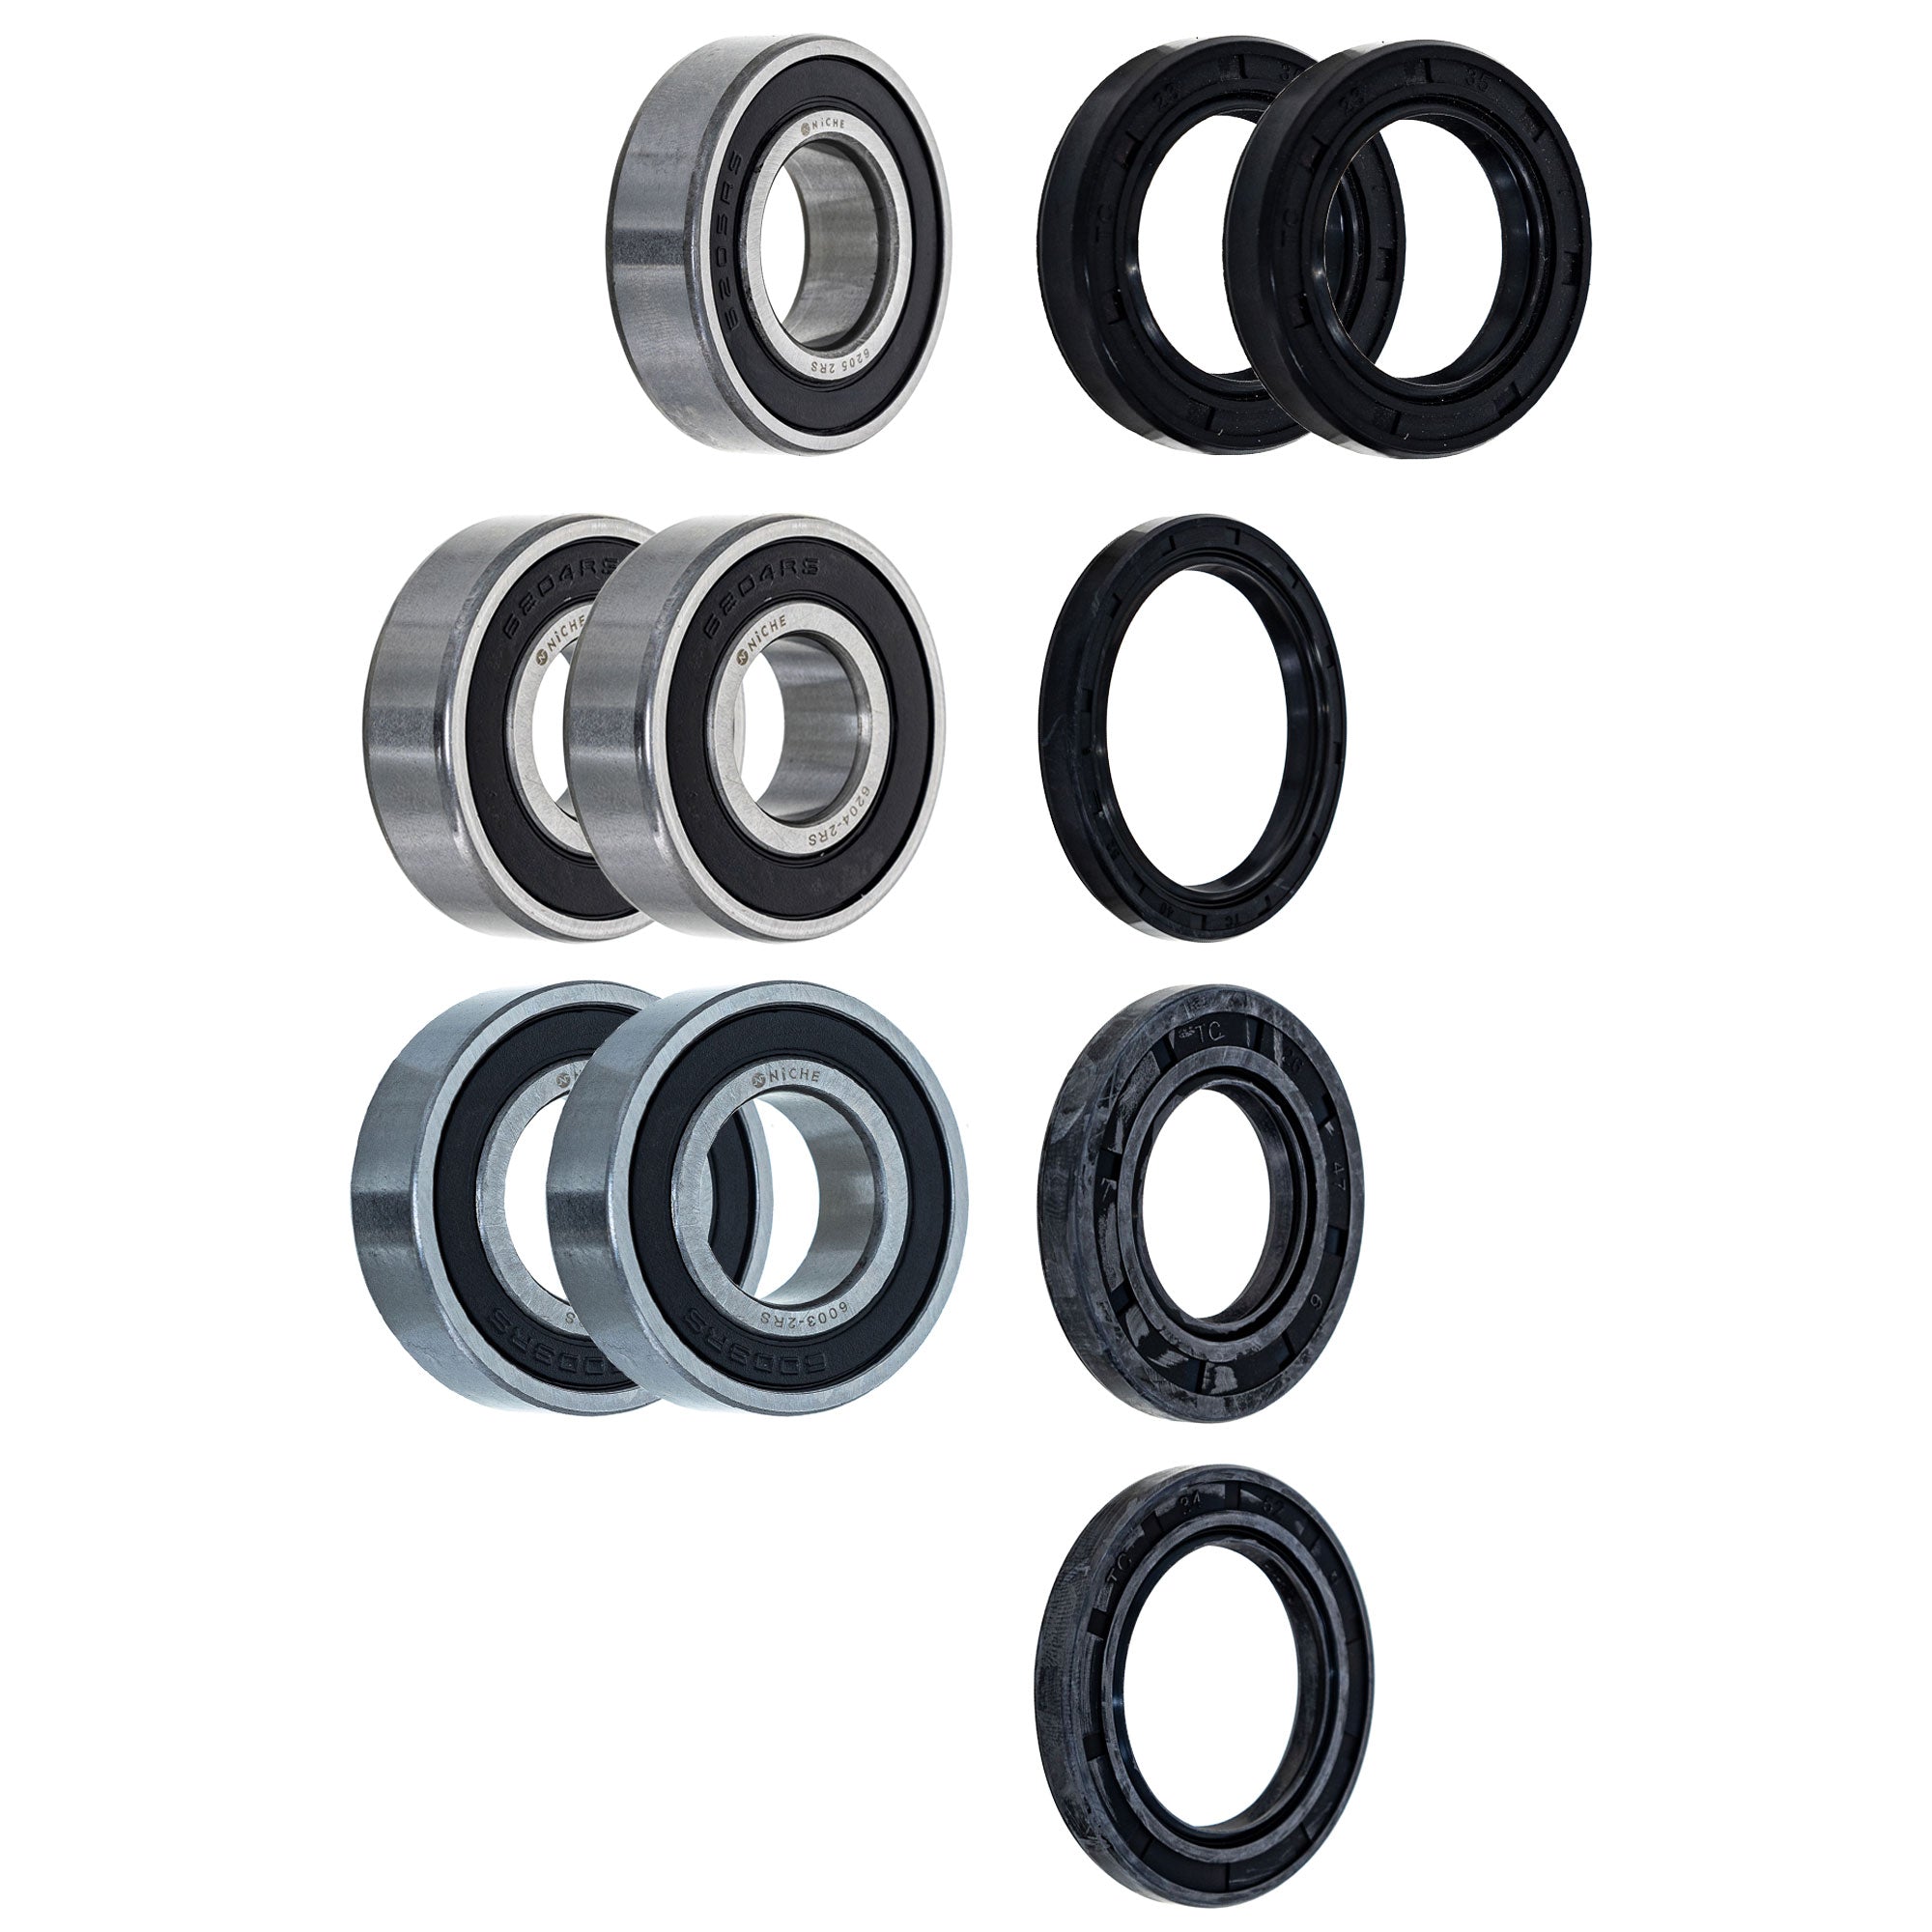 Wheel Bearing Seal Kit for zOTHER Ref No DR650SE NICHE MK1008693